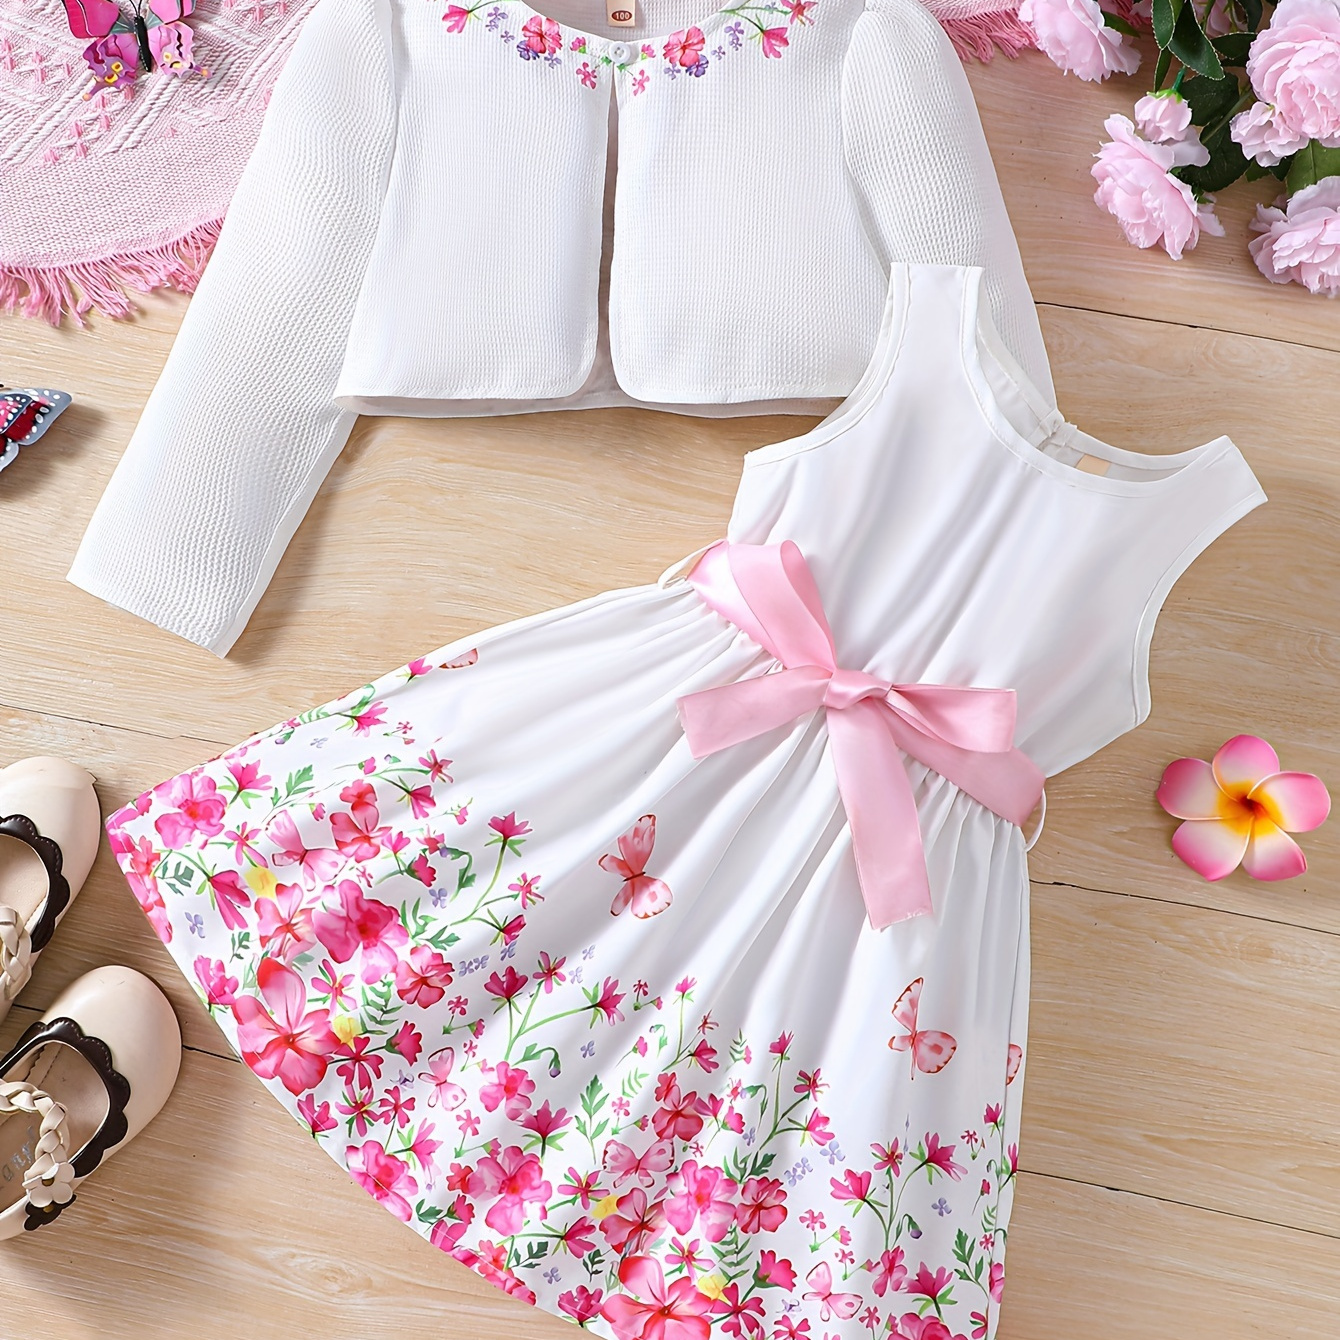 

Girl's Sweet Cute Outfit Long Sleeve Cardigan Top + Floral Graphic Sundress Set Two-piece Daily Holiday Summer Clothes